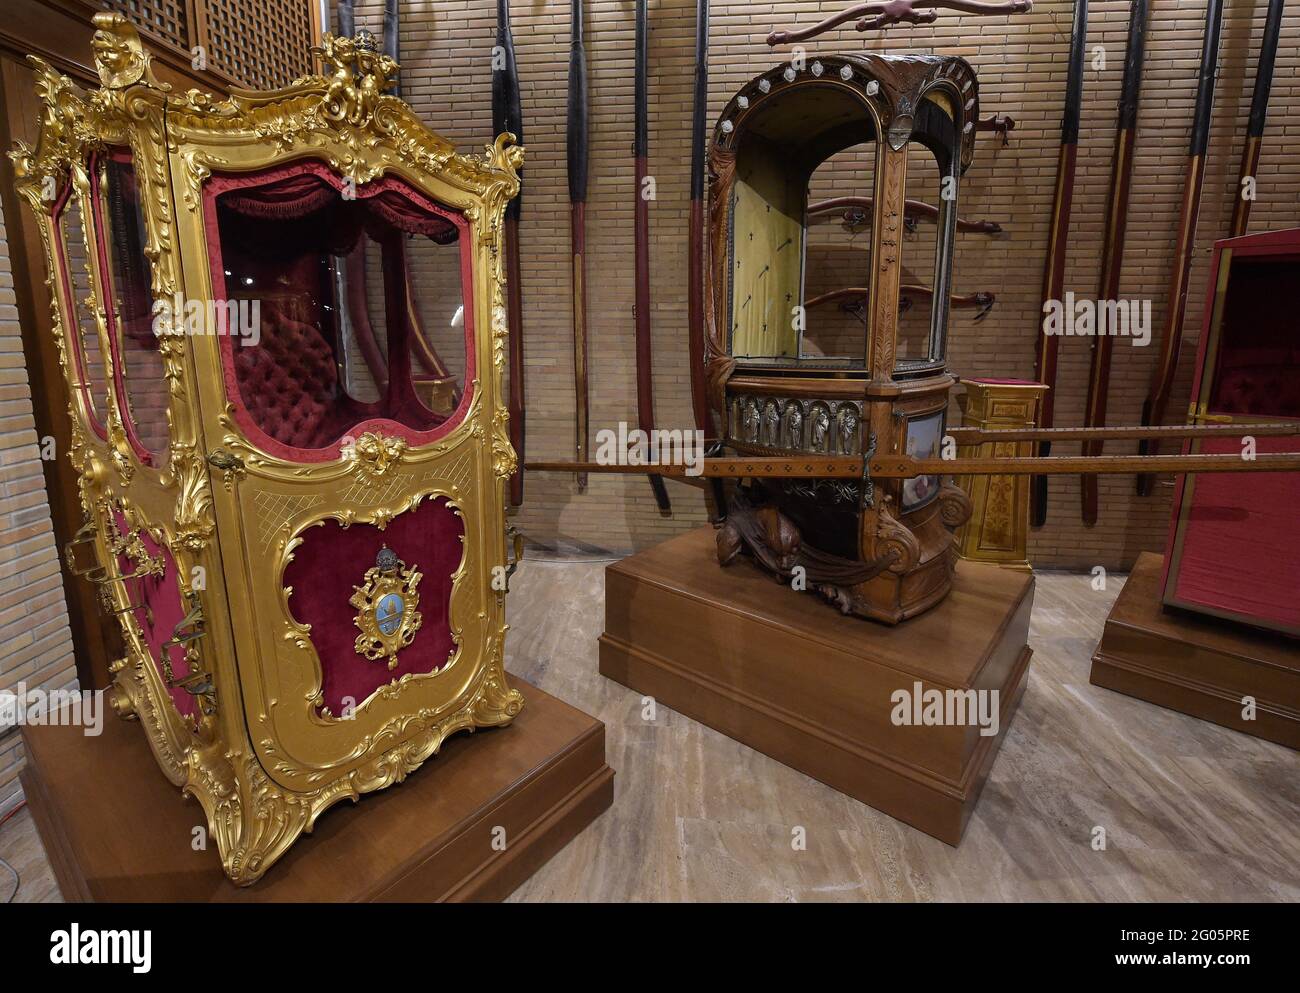 Sedan chairs of Pope Leo XIII within the carriage pavillon of the Vatican Museums on March 2021.- Inaugurated in 1973 by pope Paul VI the carriage pavillon (Padiglione delle Carrozze) of the Vatican Museums shows a collection of ceremonial berlins, sedan chairs, various automobiles and popemobiles belonging to Pontiffs or Princes of the Holy Roman Church. - LEFT: Donated by by the Chamberlains of Sword and Cape to Leo XIII for the fiftieth anniversary of his ordination as bishop (1893). This splendid sedan chair, engraved and gilded throughout, is decorated with elegant motifs of plants, flowe Stock Photo